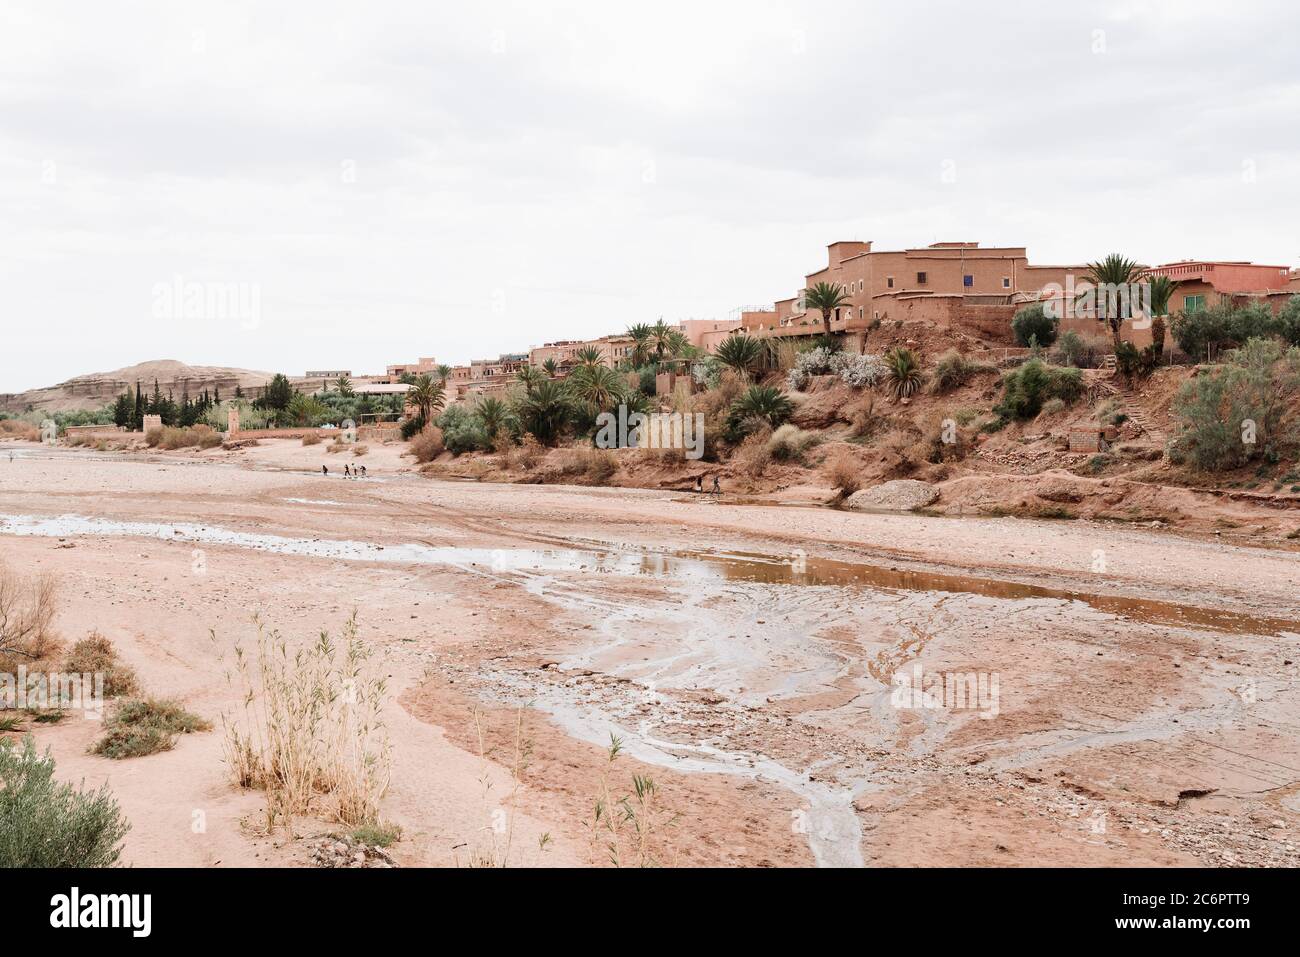 Red Rock Buildings at Ait Ben Haddou, Morocco, Stand Above a Dry Riverbed in the Desert Stock Photo